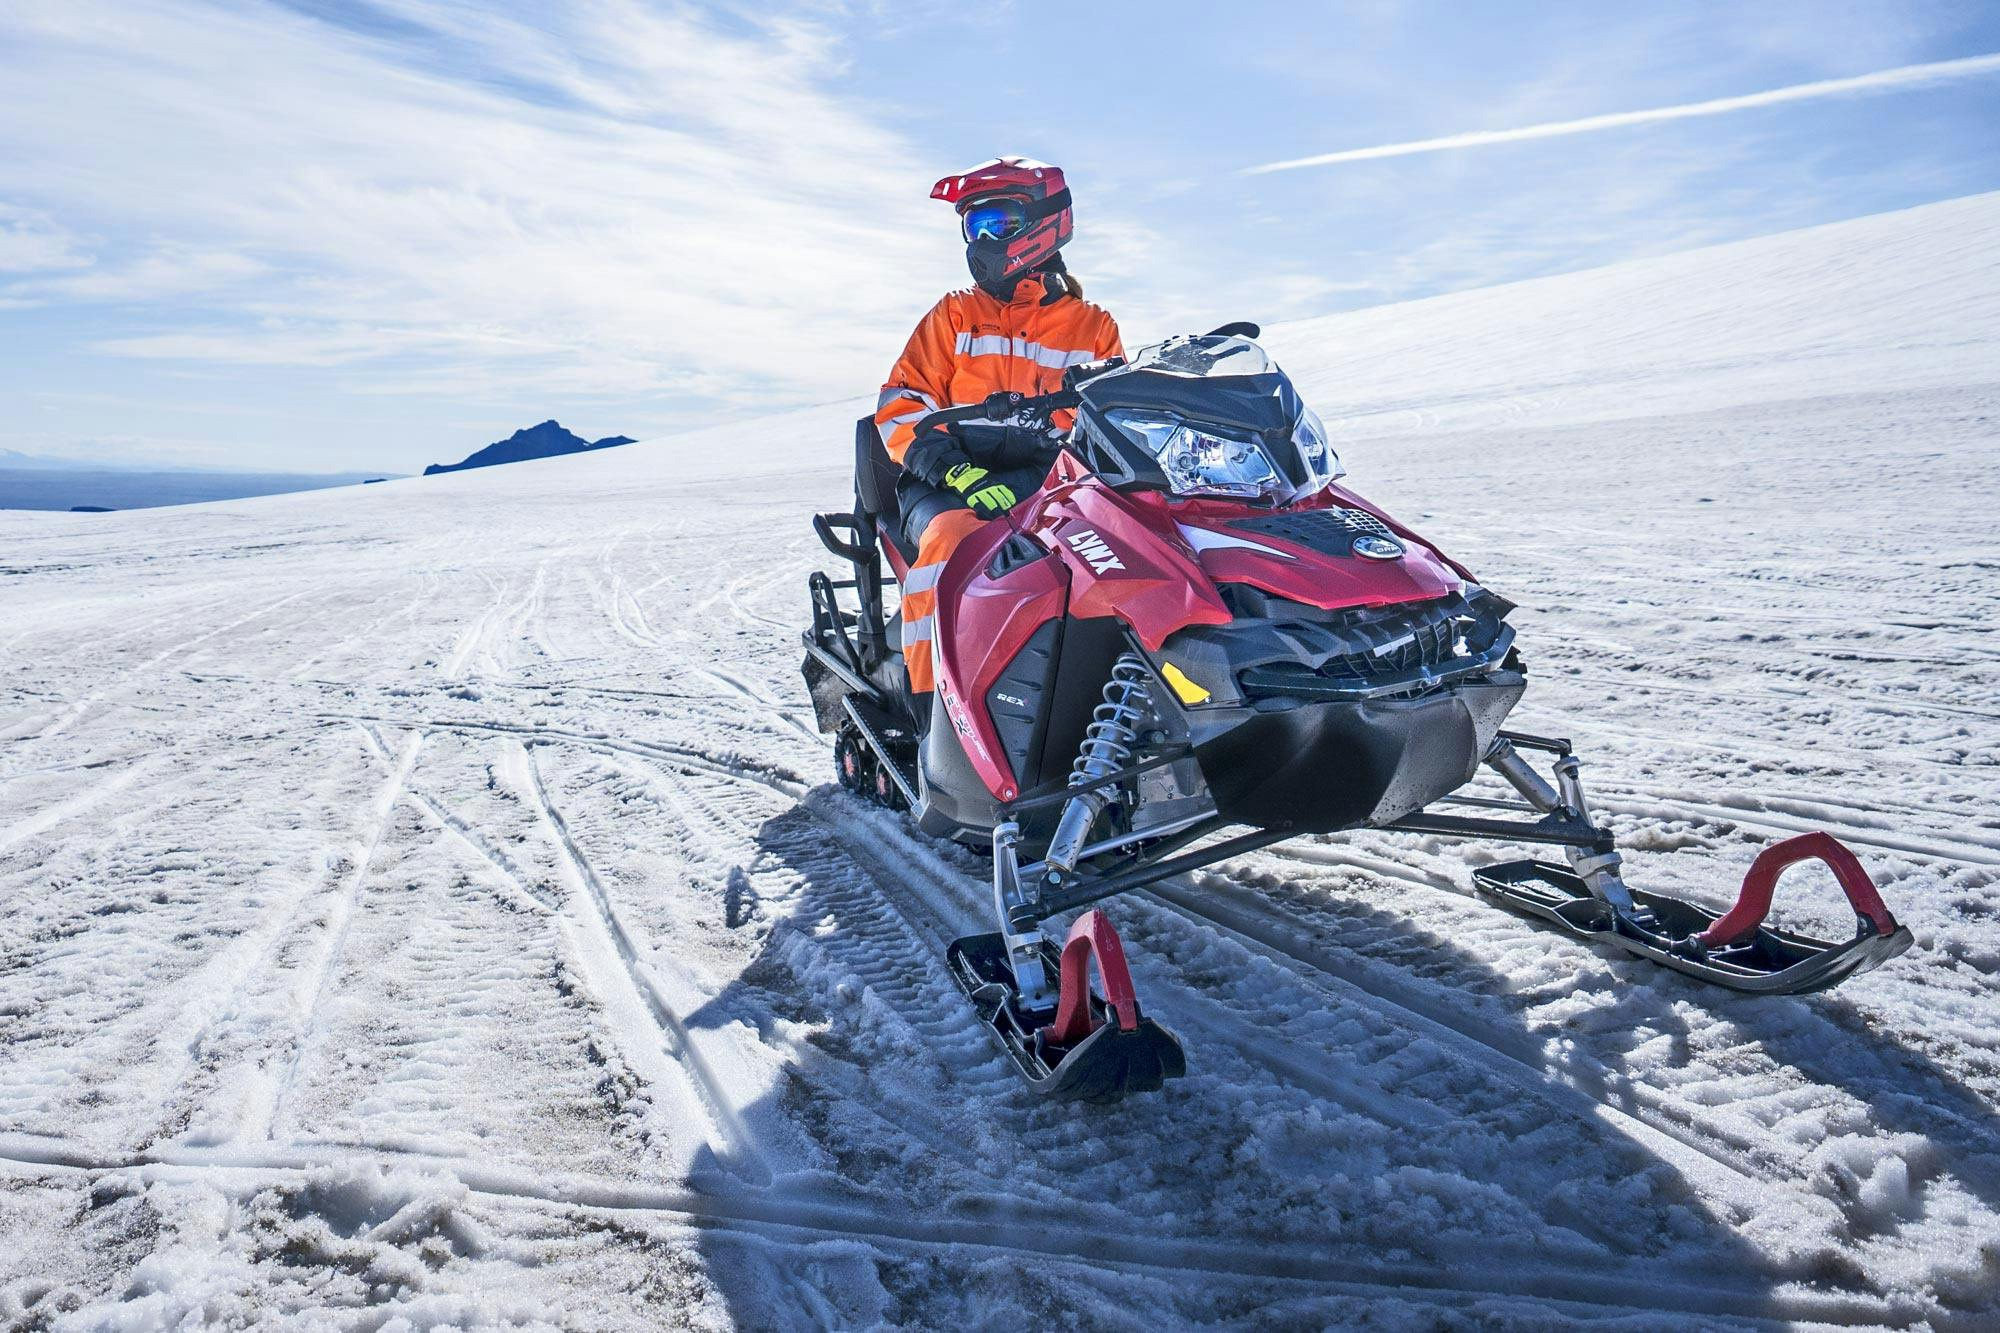 Full-Day Snowmobiling & Golden Circle Semi Private Super Jeep Tour - 6 People Max!